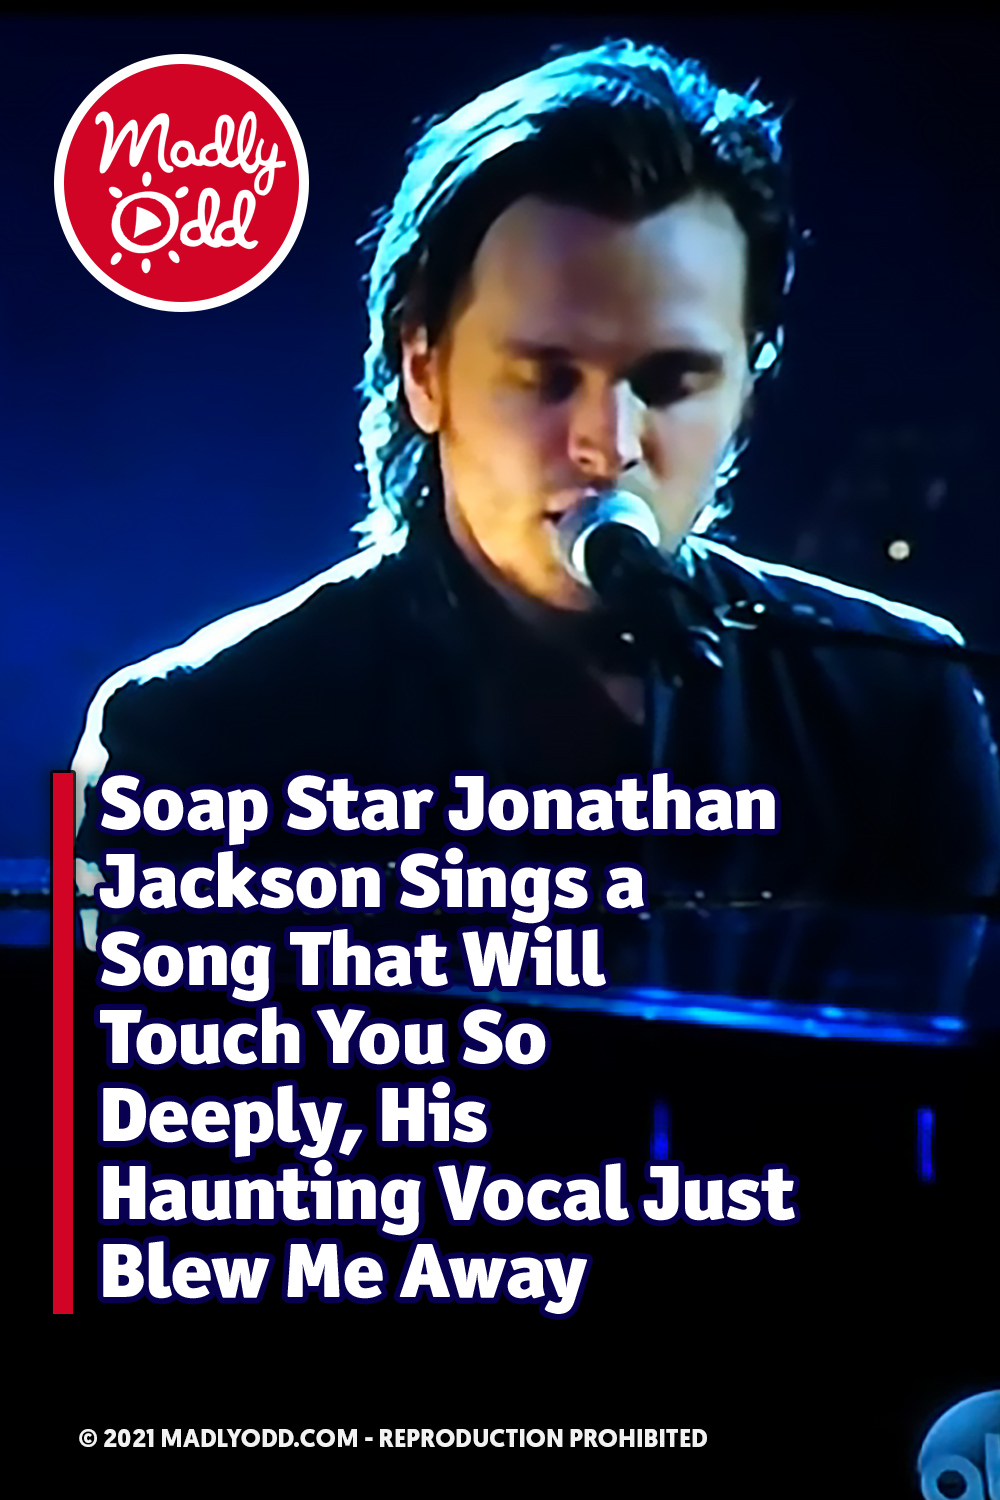 Soap Star Jonathan Jackson Sings a Song That Will Touch You So Deeply, His Haunting Vocal Just Blew Me Away